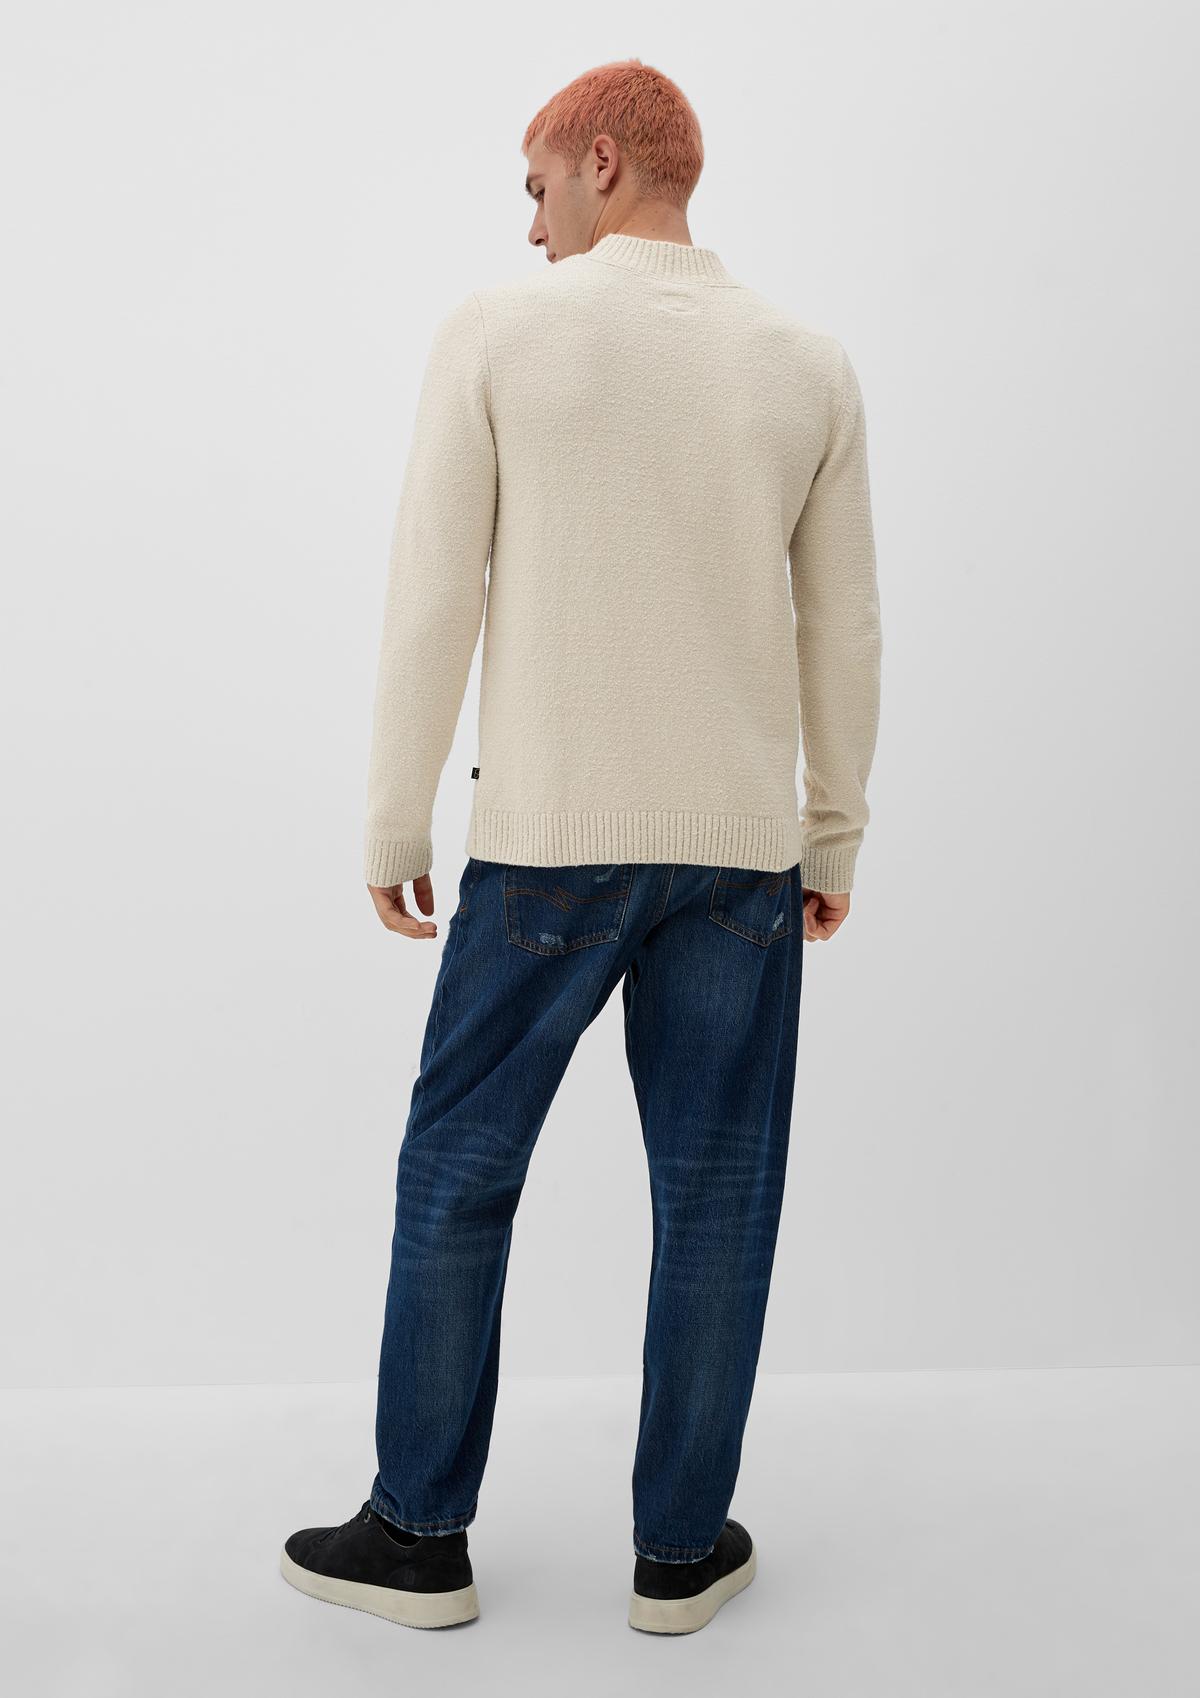 s.Oliver Jumper made of knitted bouclé